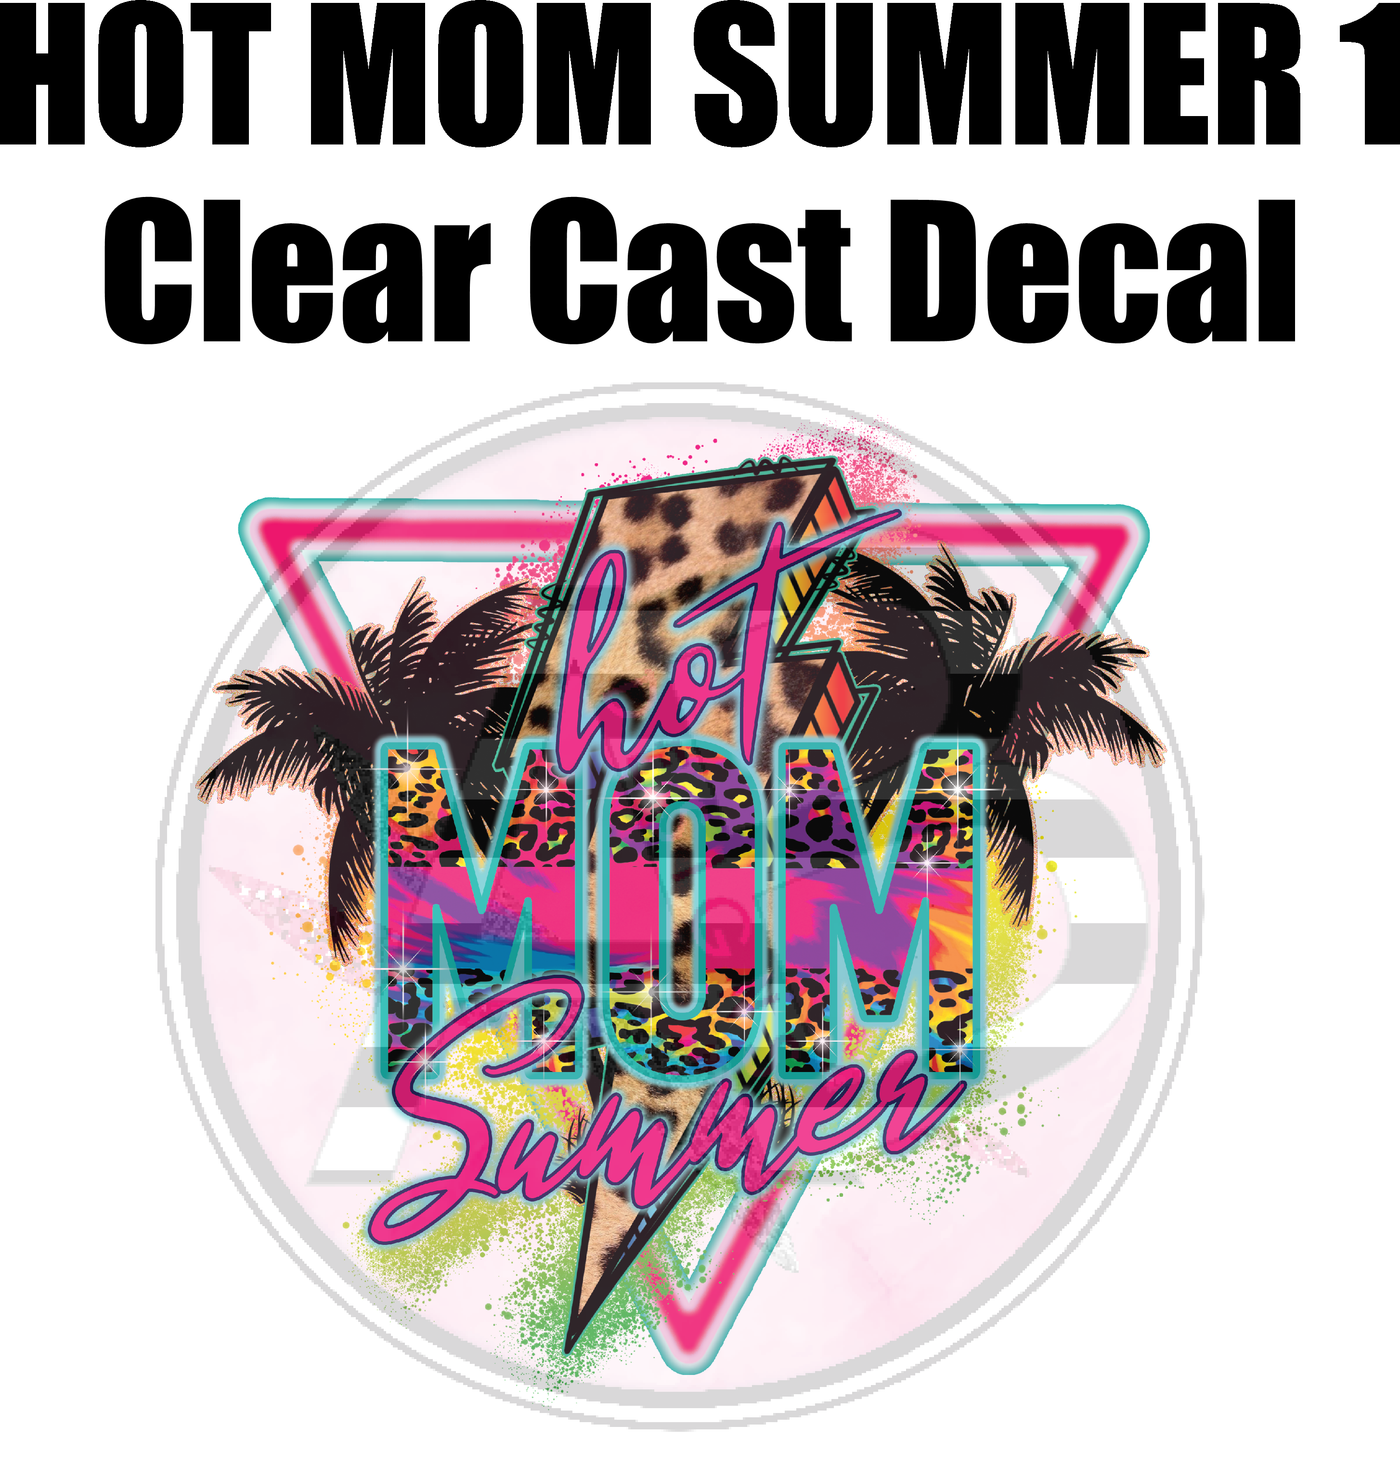 Hot Mom Summer - Clear Cast Decal